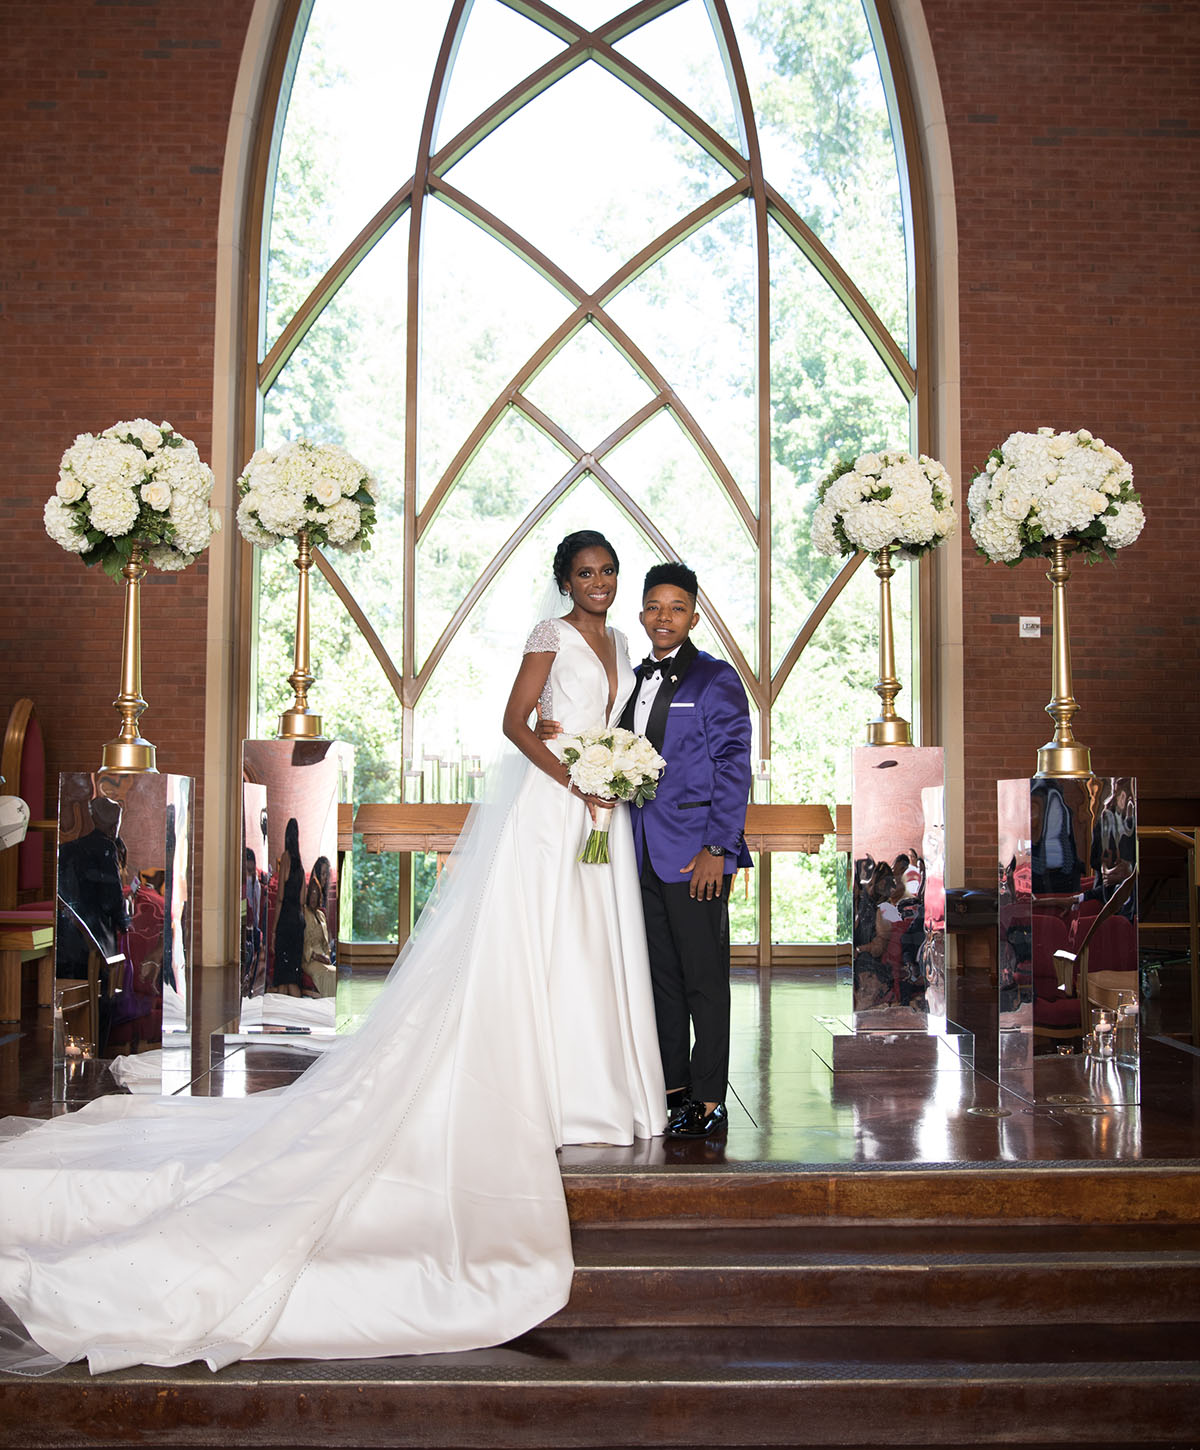 Southern traditional chapel wedding two brides purple tuxedo long white dress church God religious cultural traditions